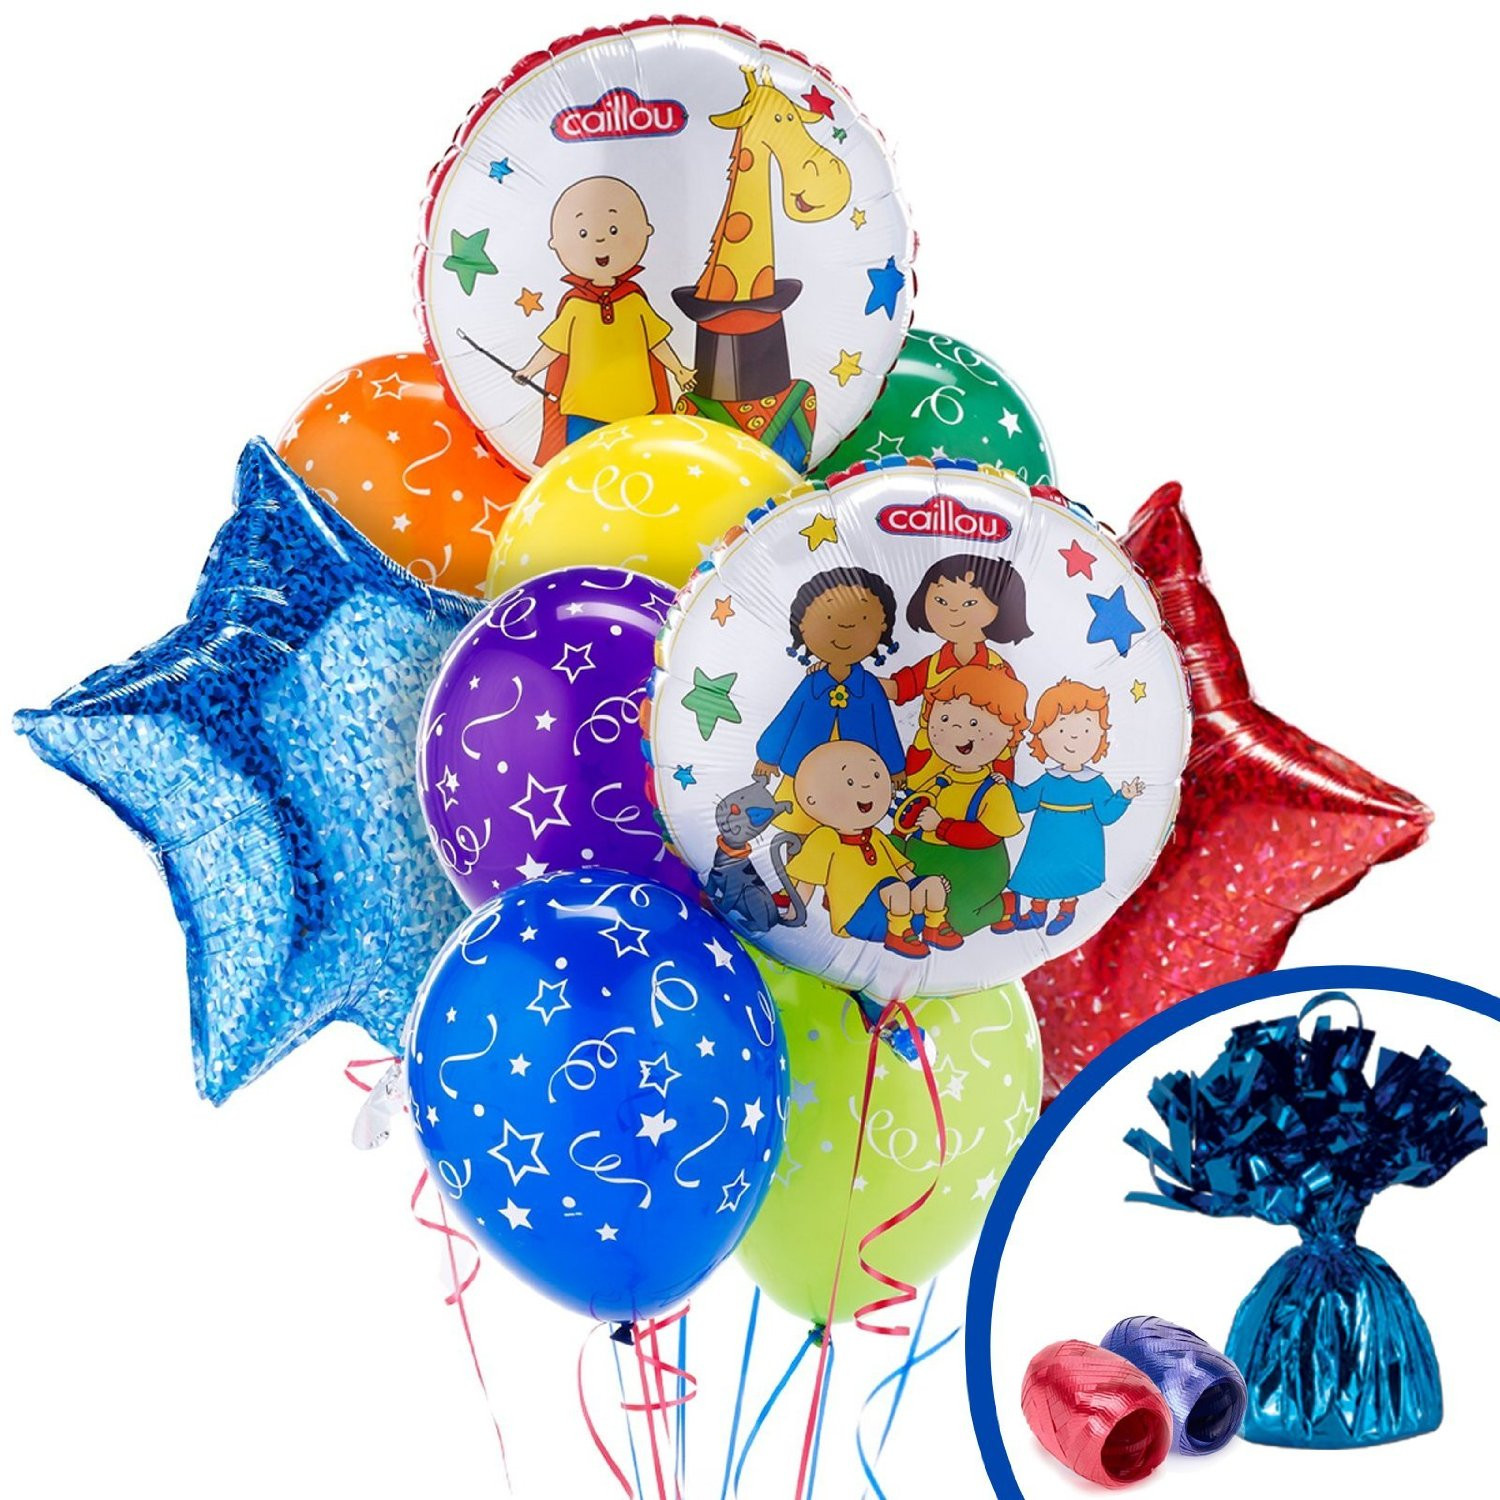 Caillou Birthday Decorations
 Please Plan My Party Caillou Birthday Party Ideas